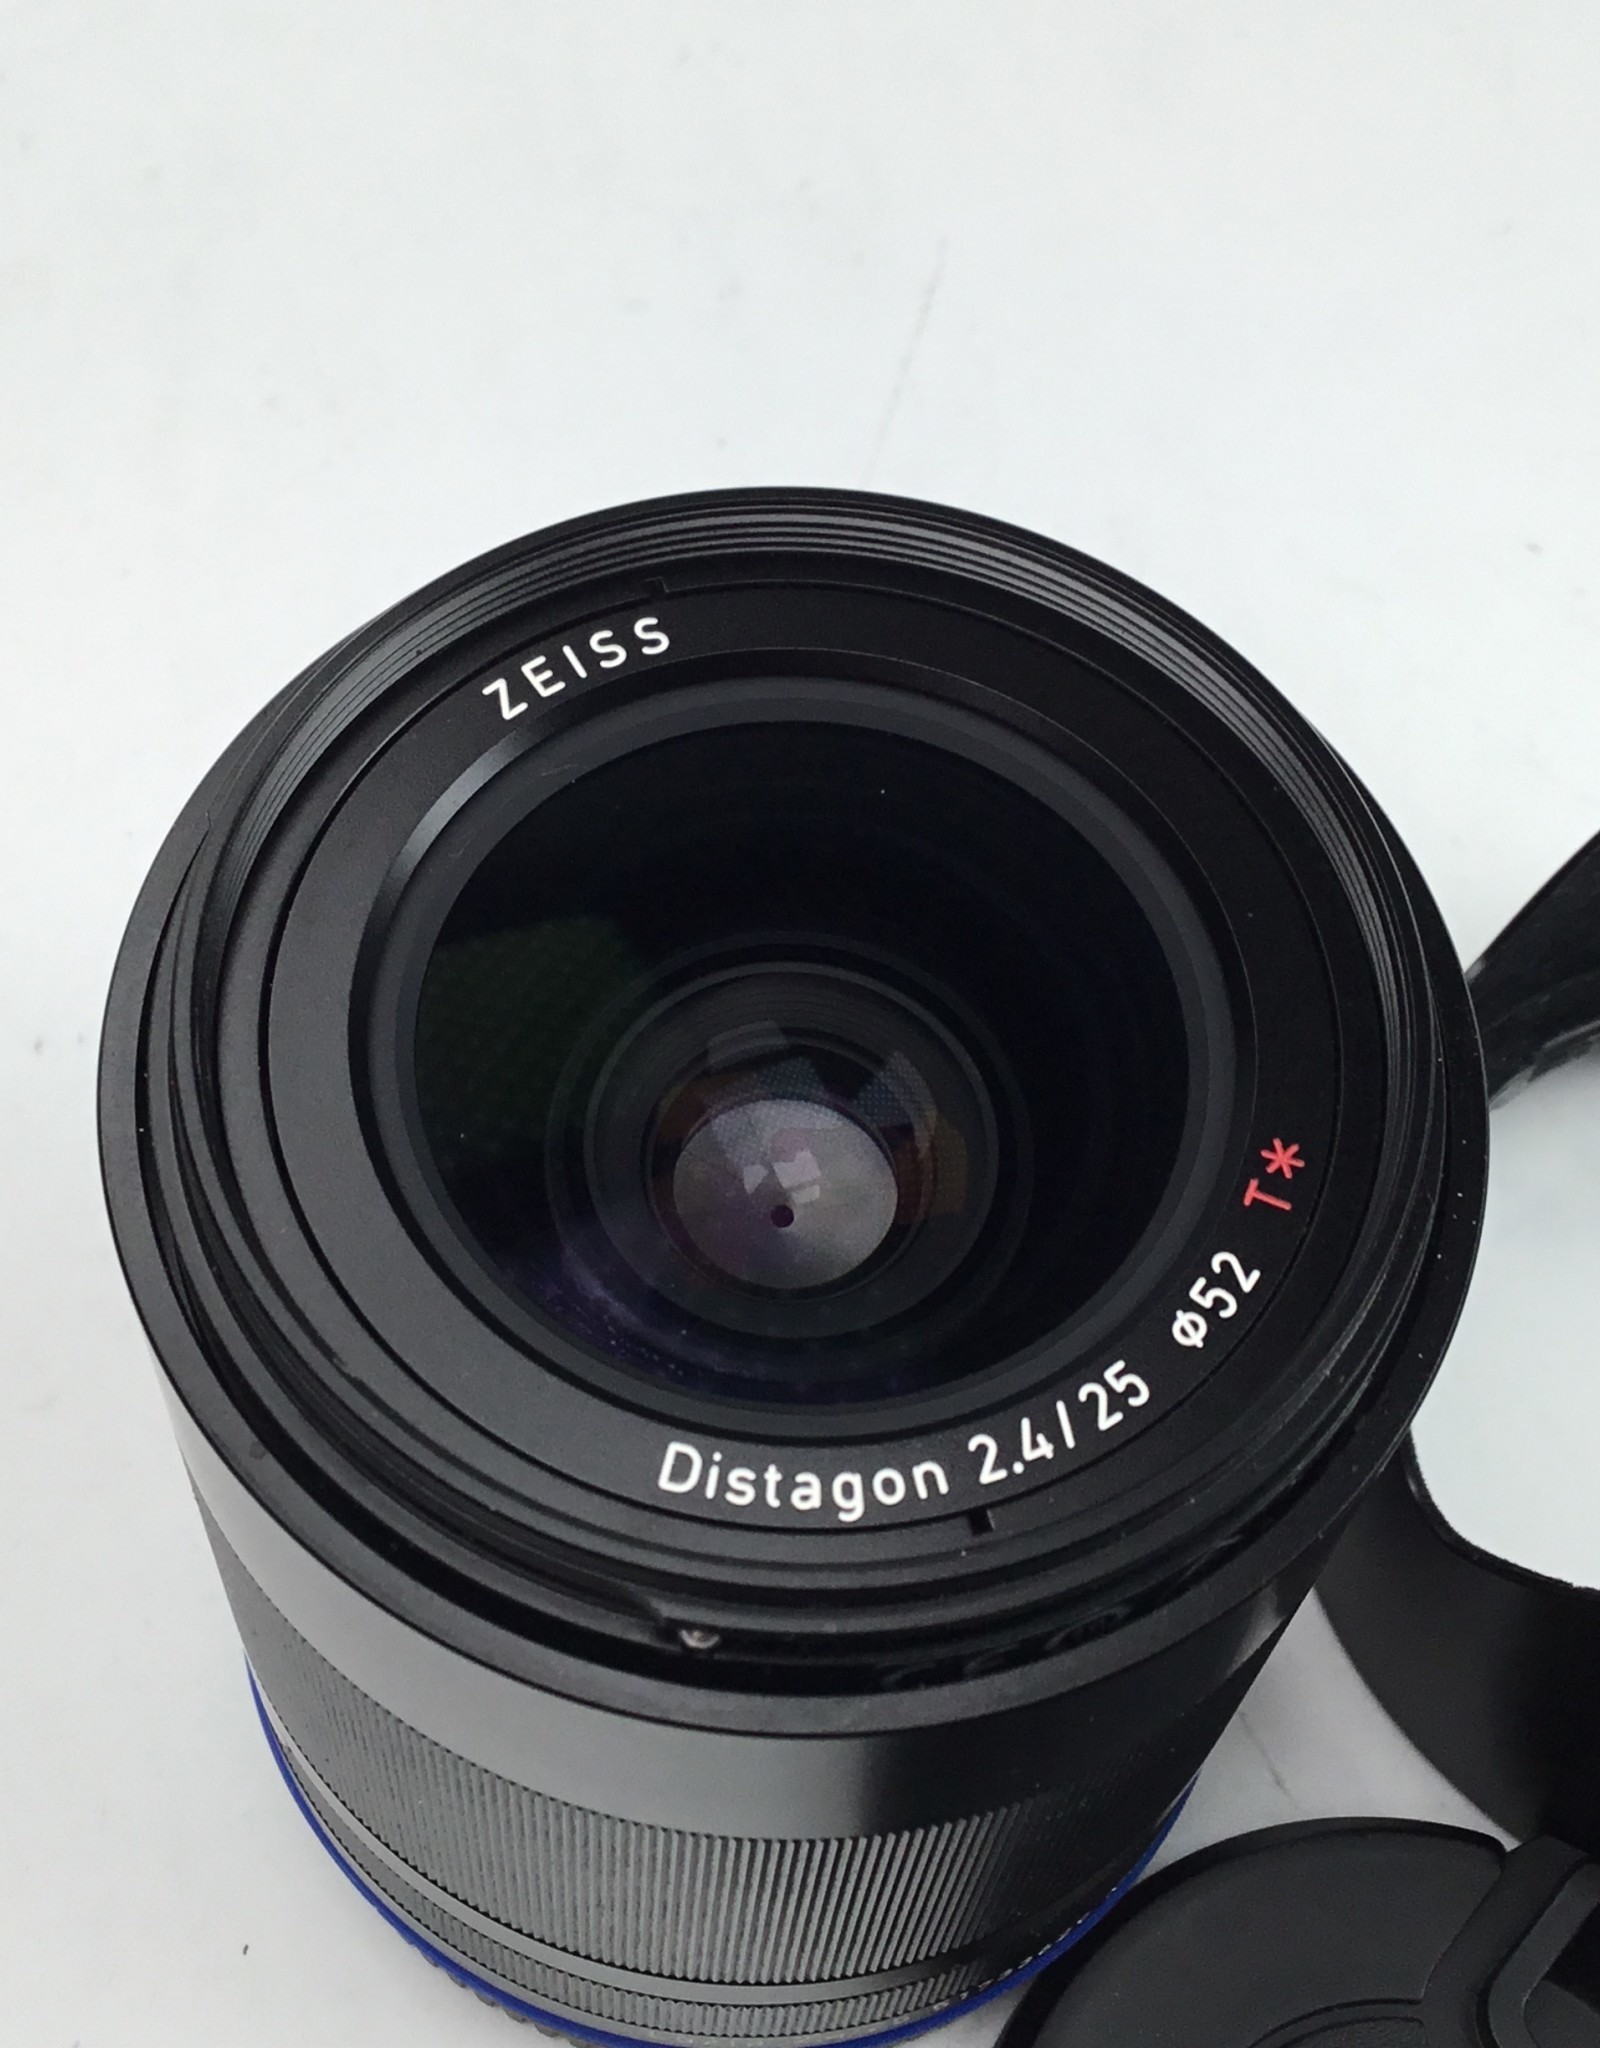 ZEISS Zeiss Loxia Distagon 25mm f2.4 Lens for Sony E Used Good